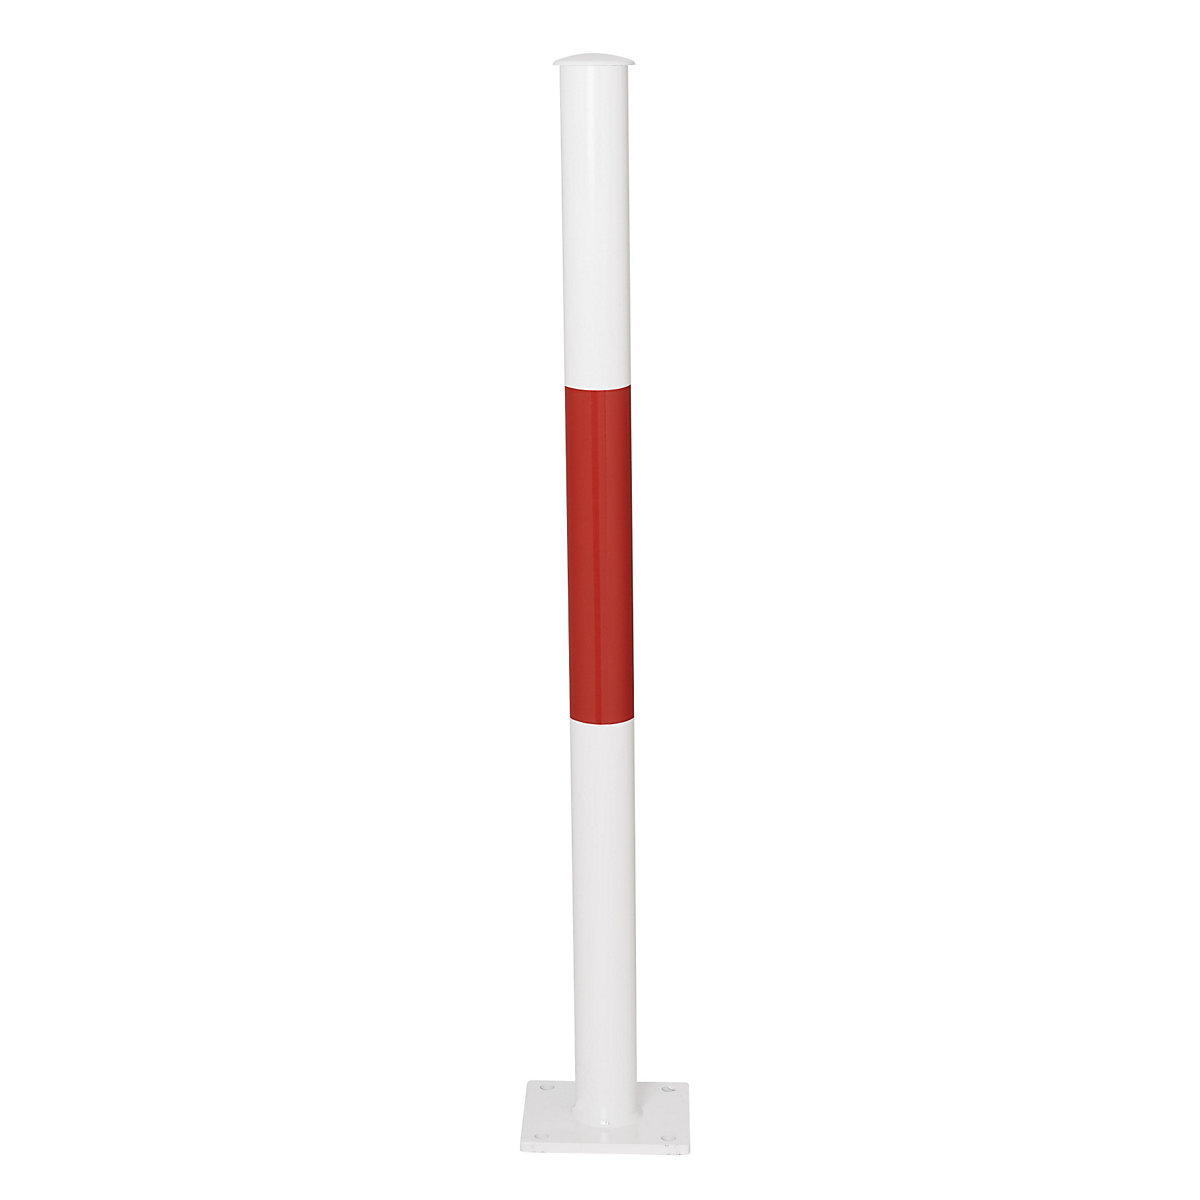 Railing system, upright with base plate, red/white